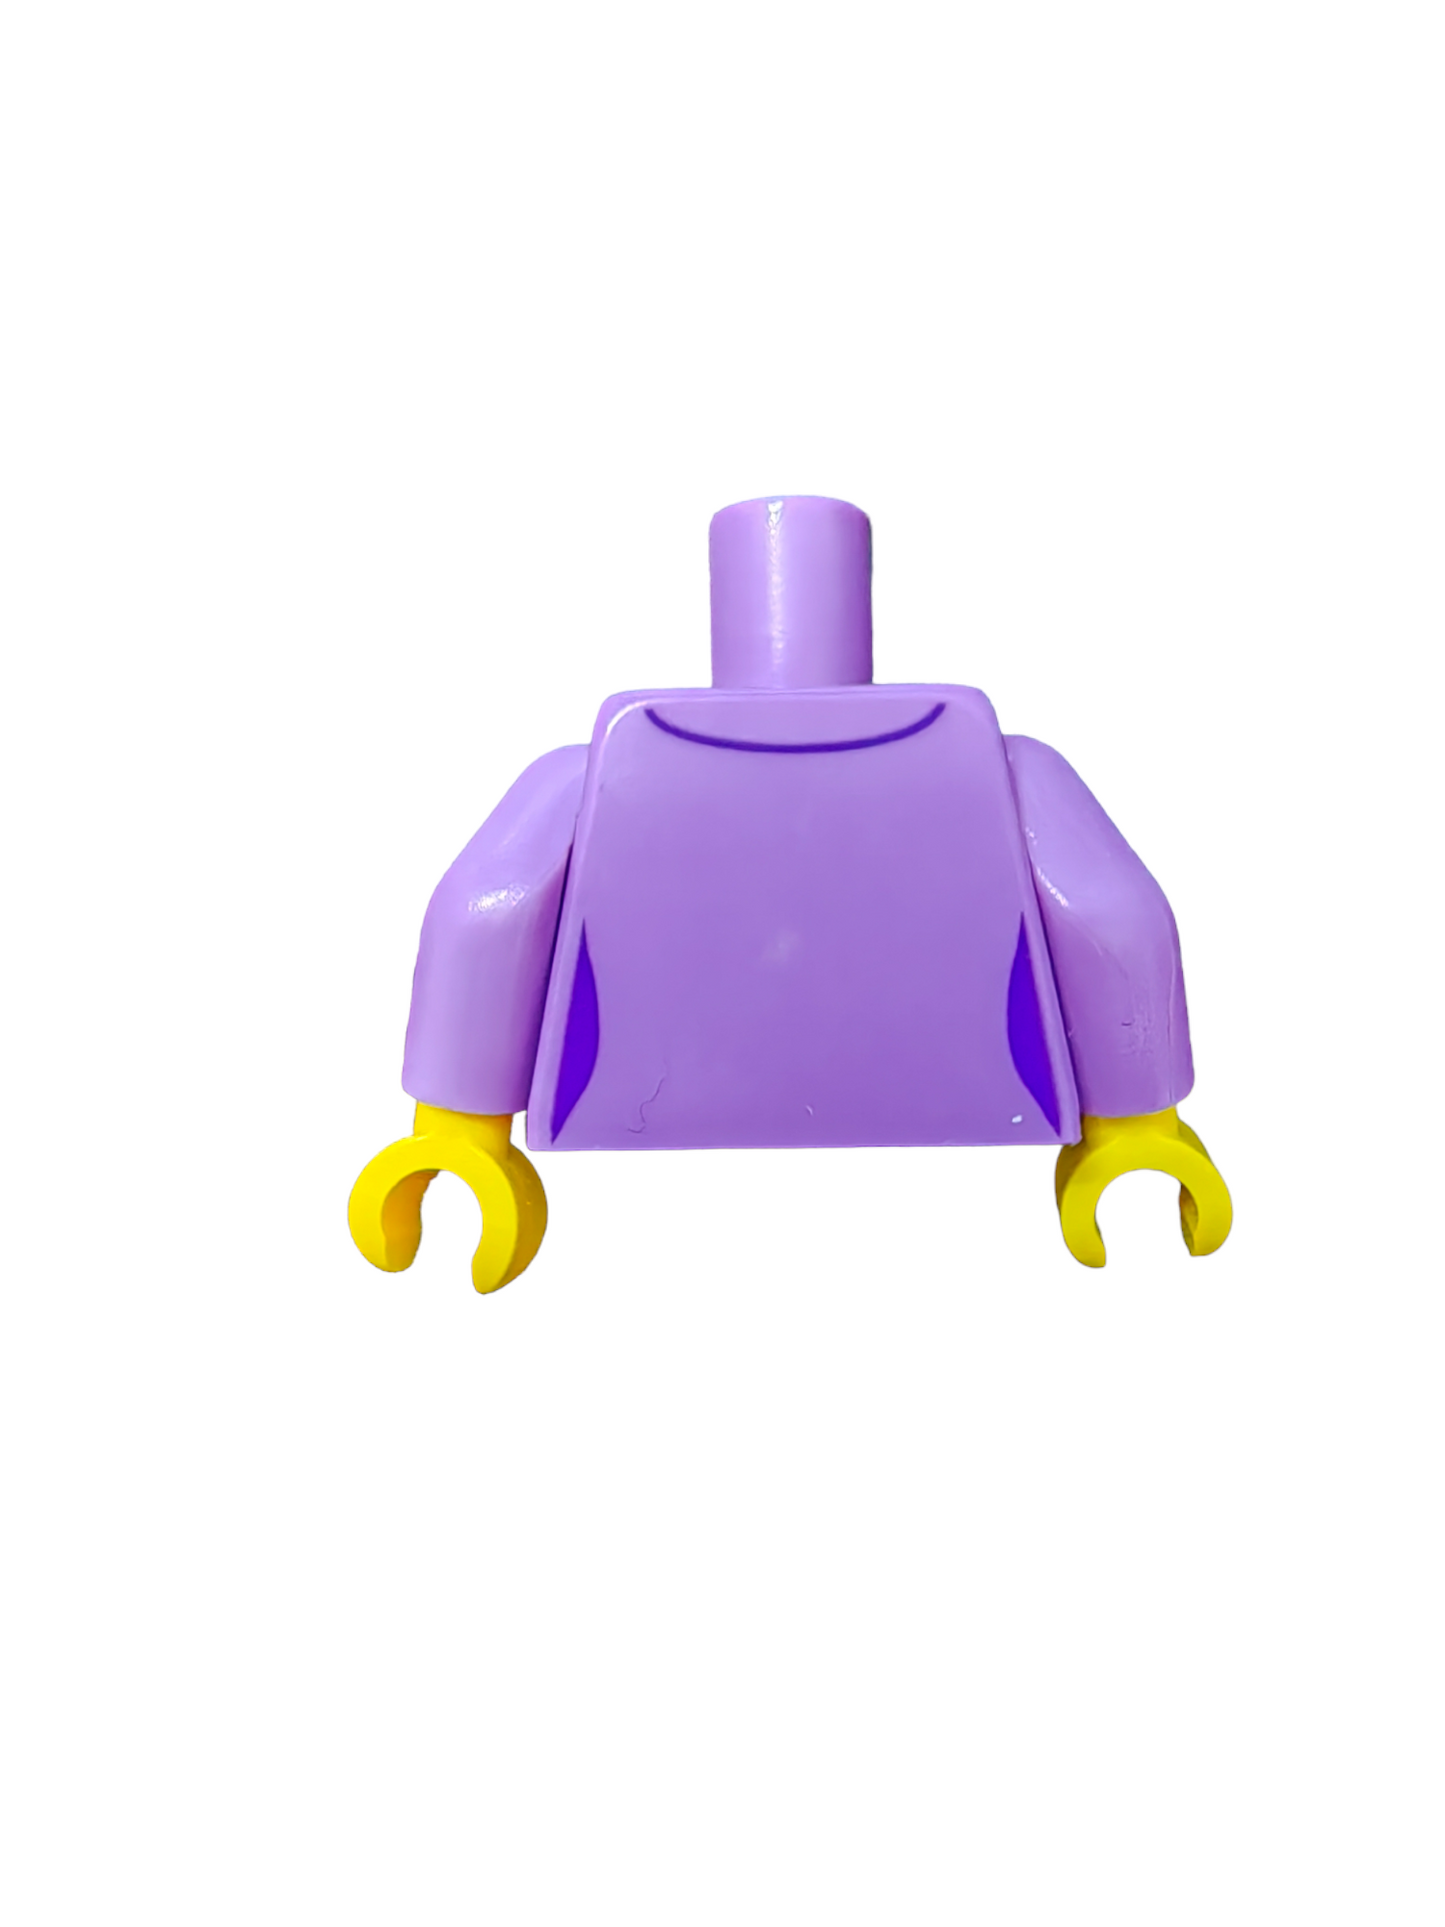 LEGO Torso, Lavender Jacket with Buttons, Silver Necklace - UB1092